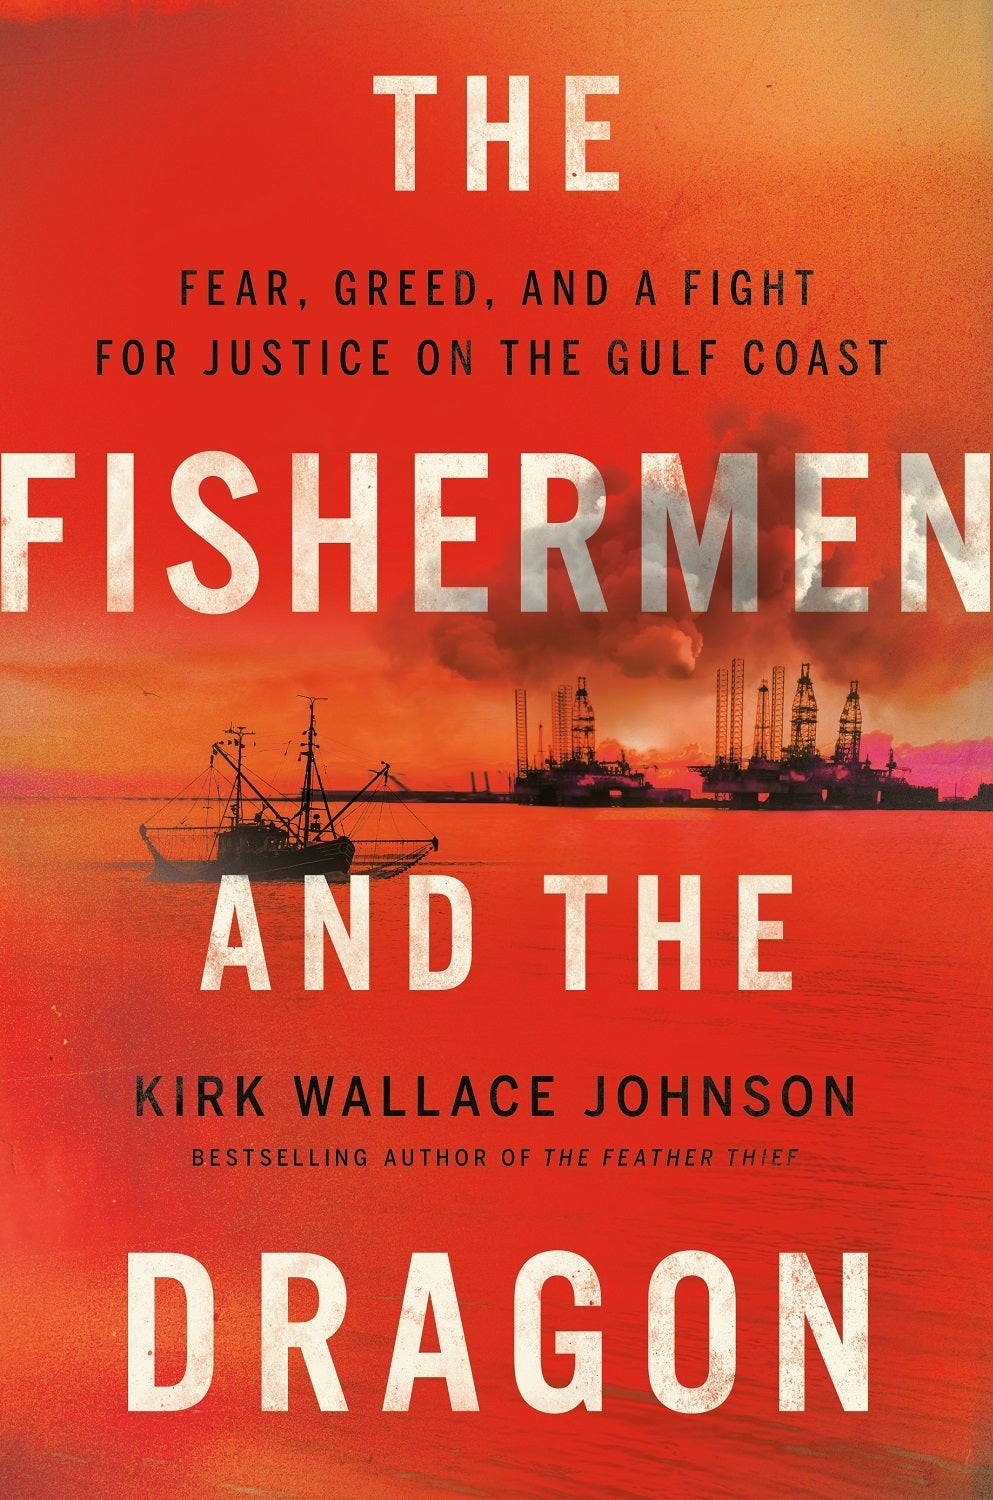 Red cover with hazy image of Formosa plant in Point Comfort, Texas, with white all-caps text that says The Fisherman and the Dragon